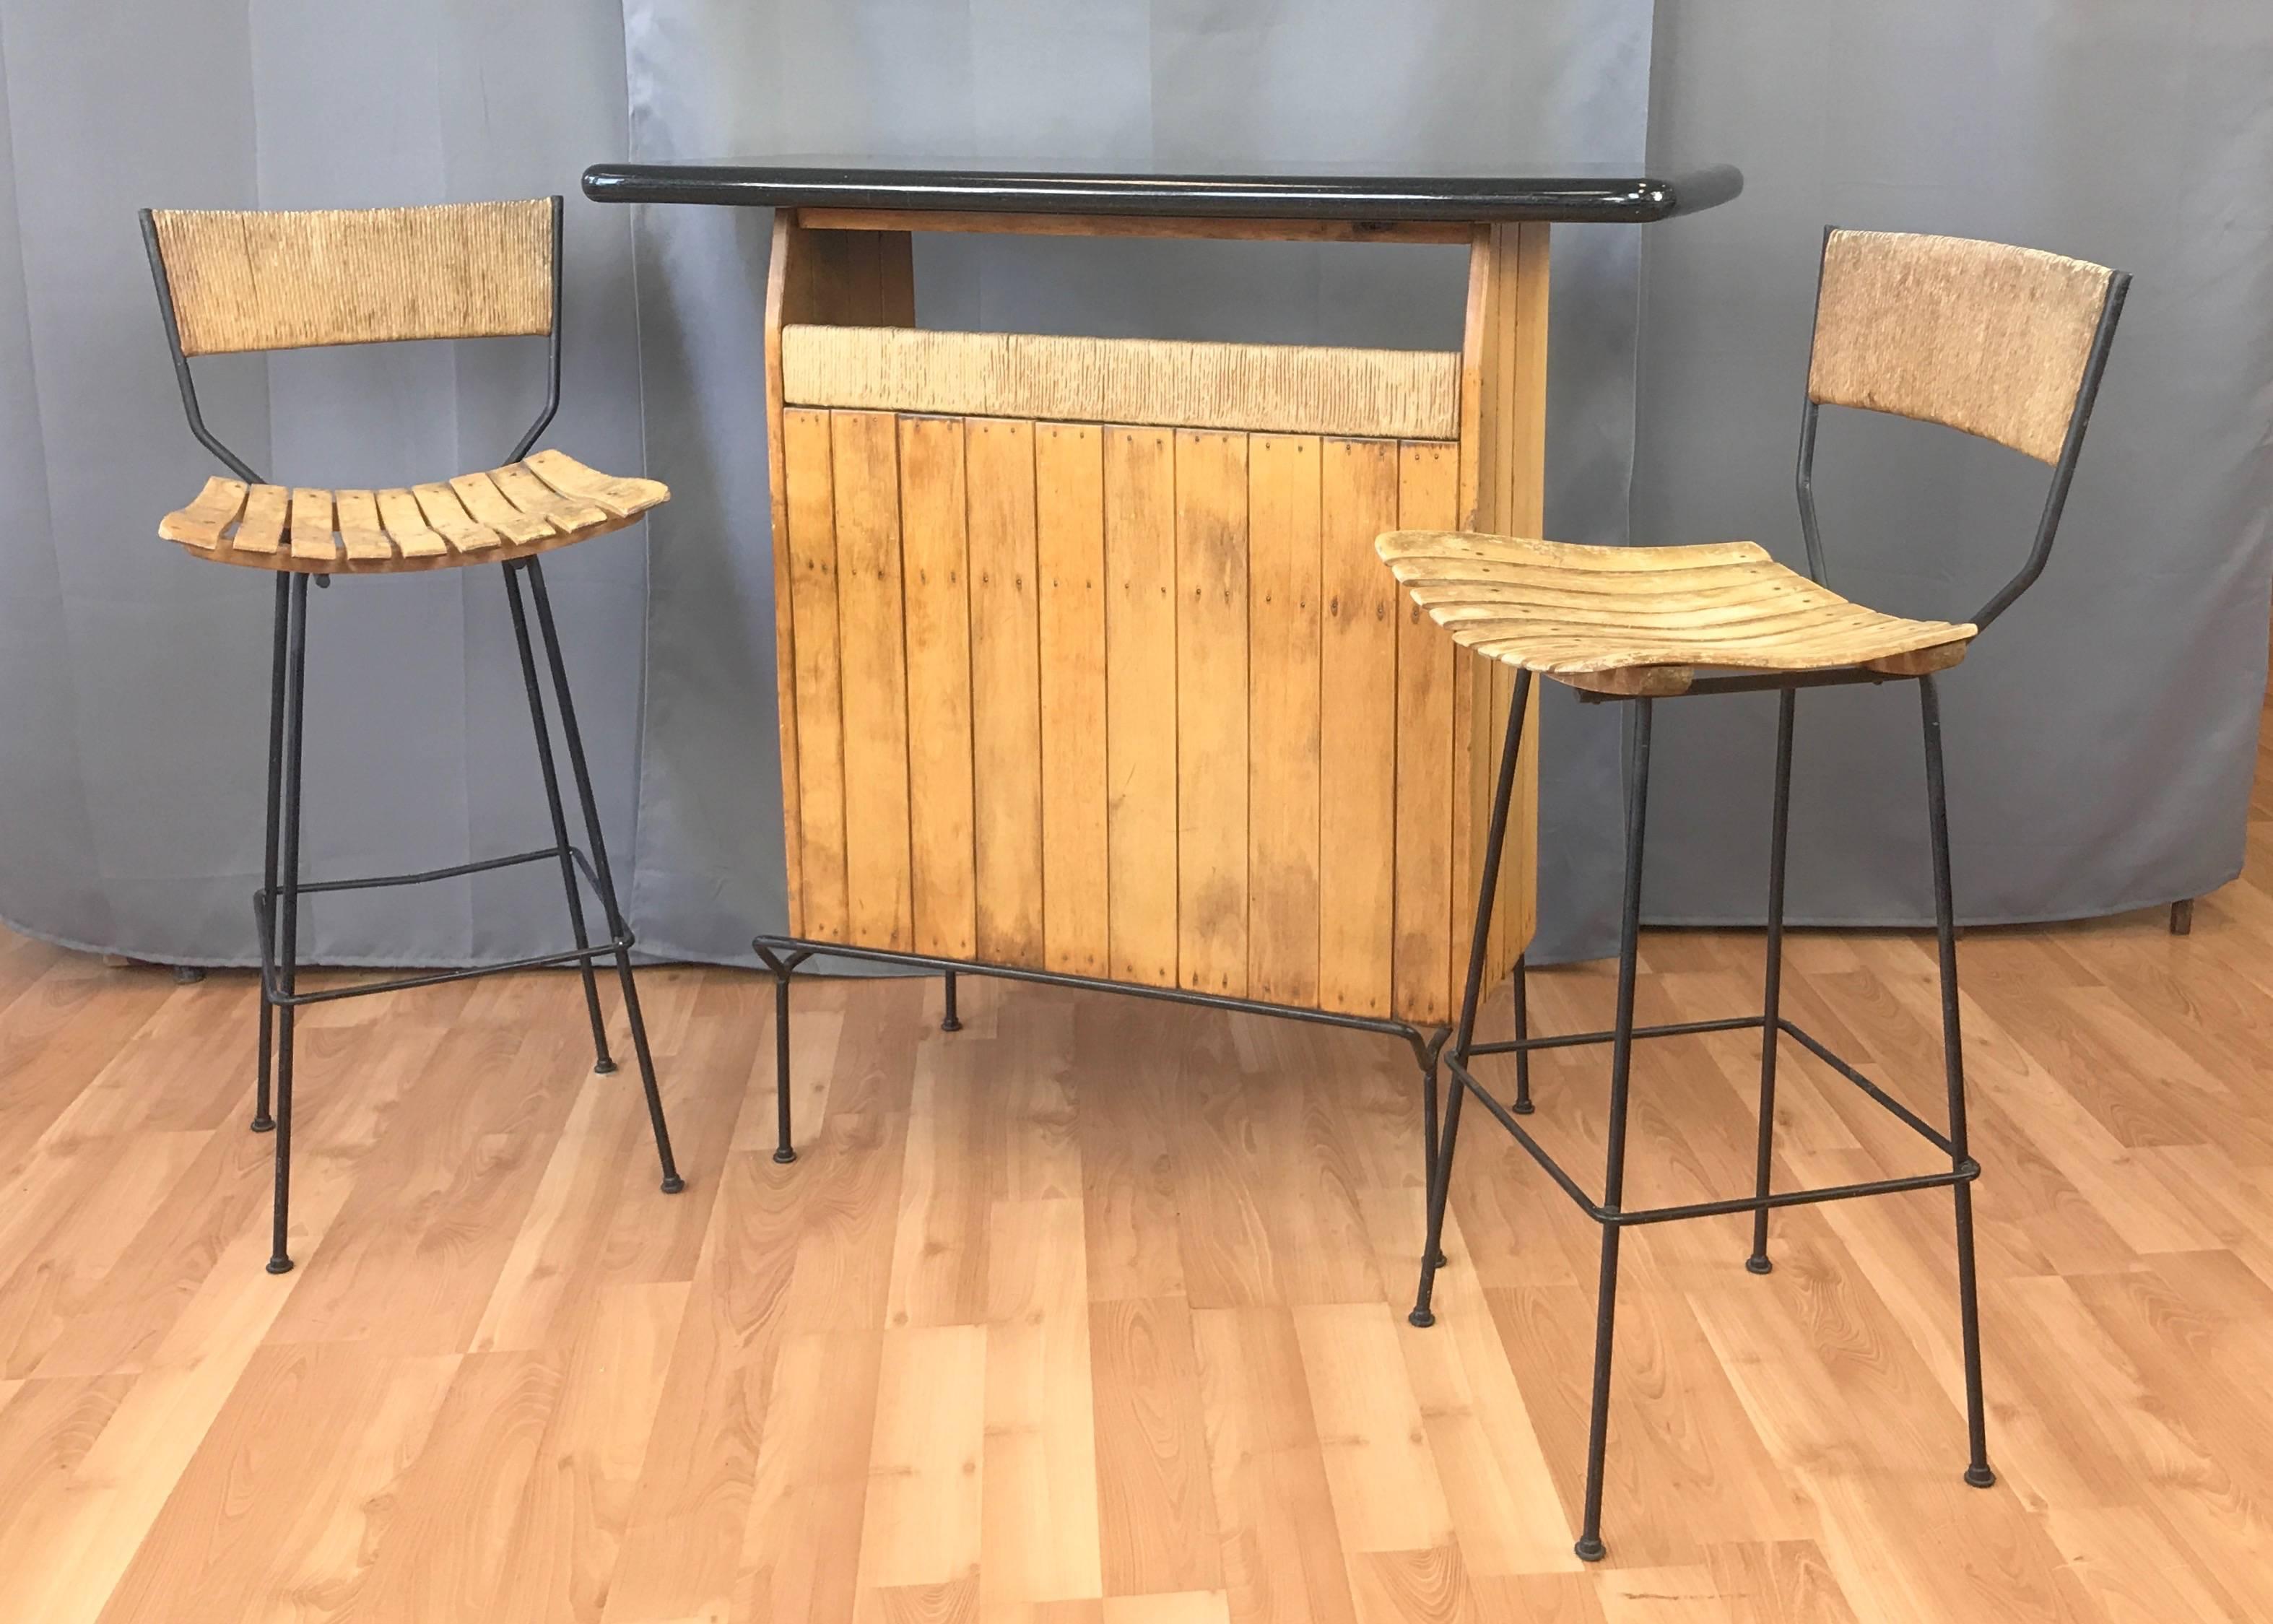 A midcentury wrought iron, birch, and papercord dry bar with a pair of matching stools by Arthur Umanoff for Shaver Howard, and distributed by Raymor.

Bar has black wrought iron rod base with footrest, birch slat front and sides with